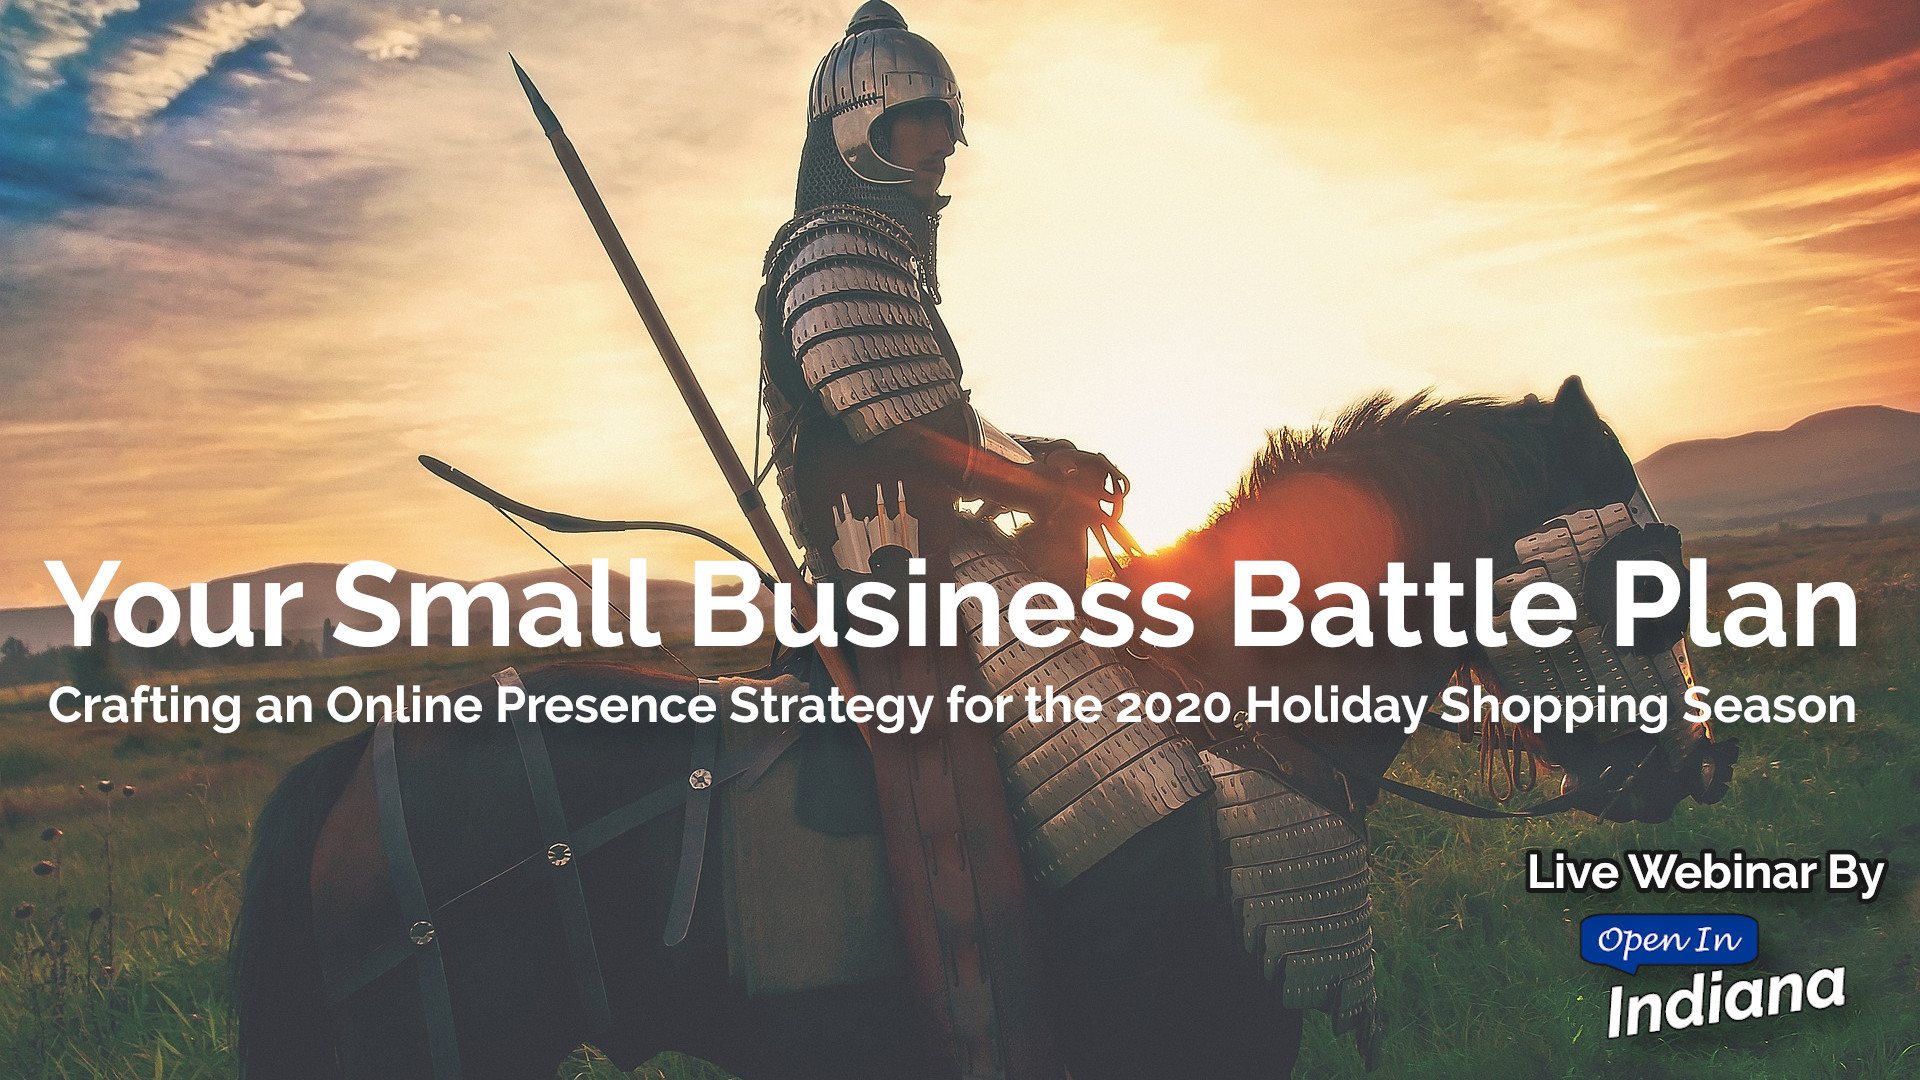 Your Small Business Battle Plan: Crafting an Online Presence Strategy for the 2020 Holiday Shopping season, Live webinar by Open In Indiana